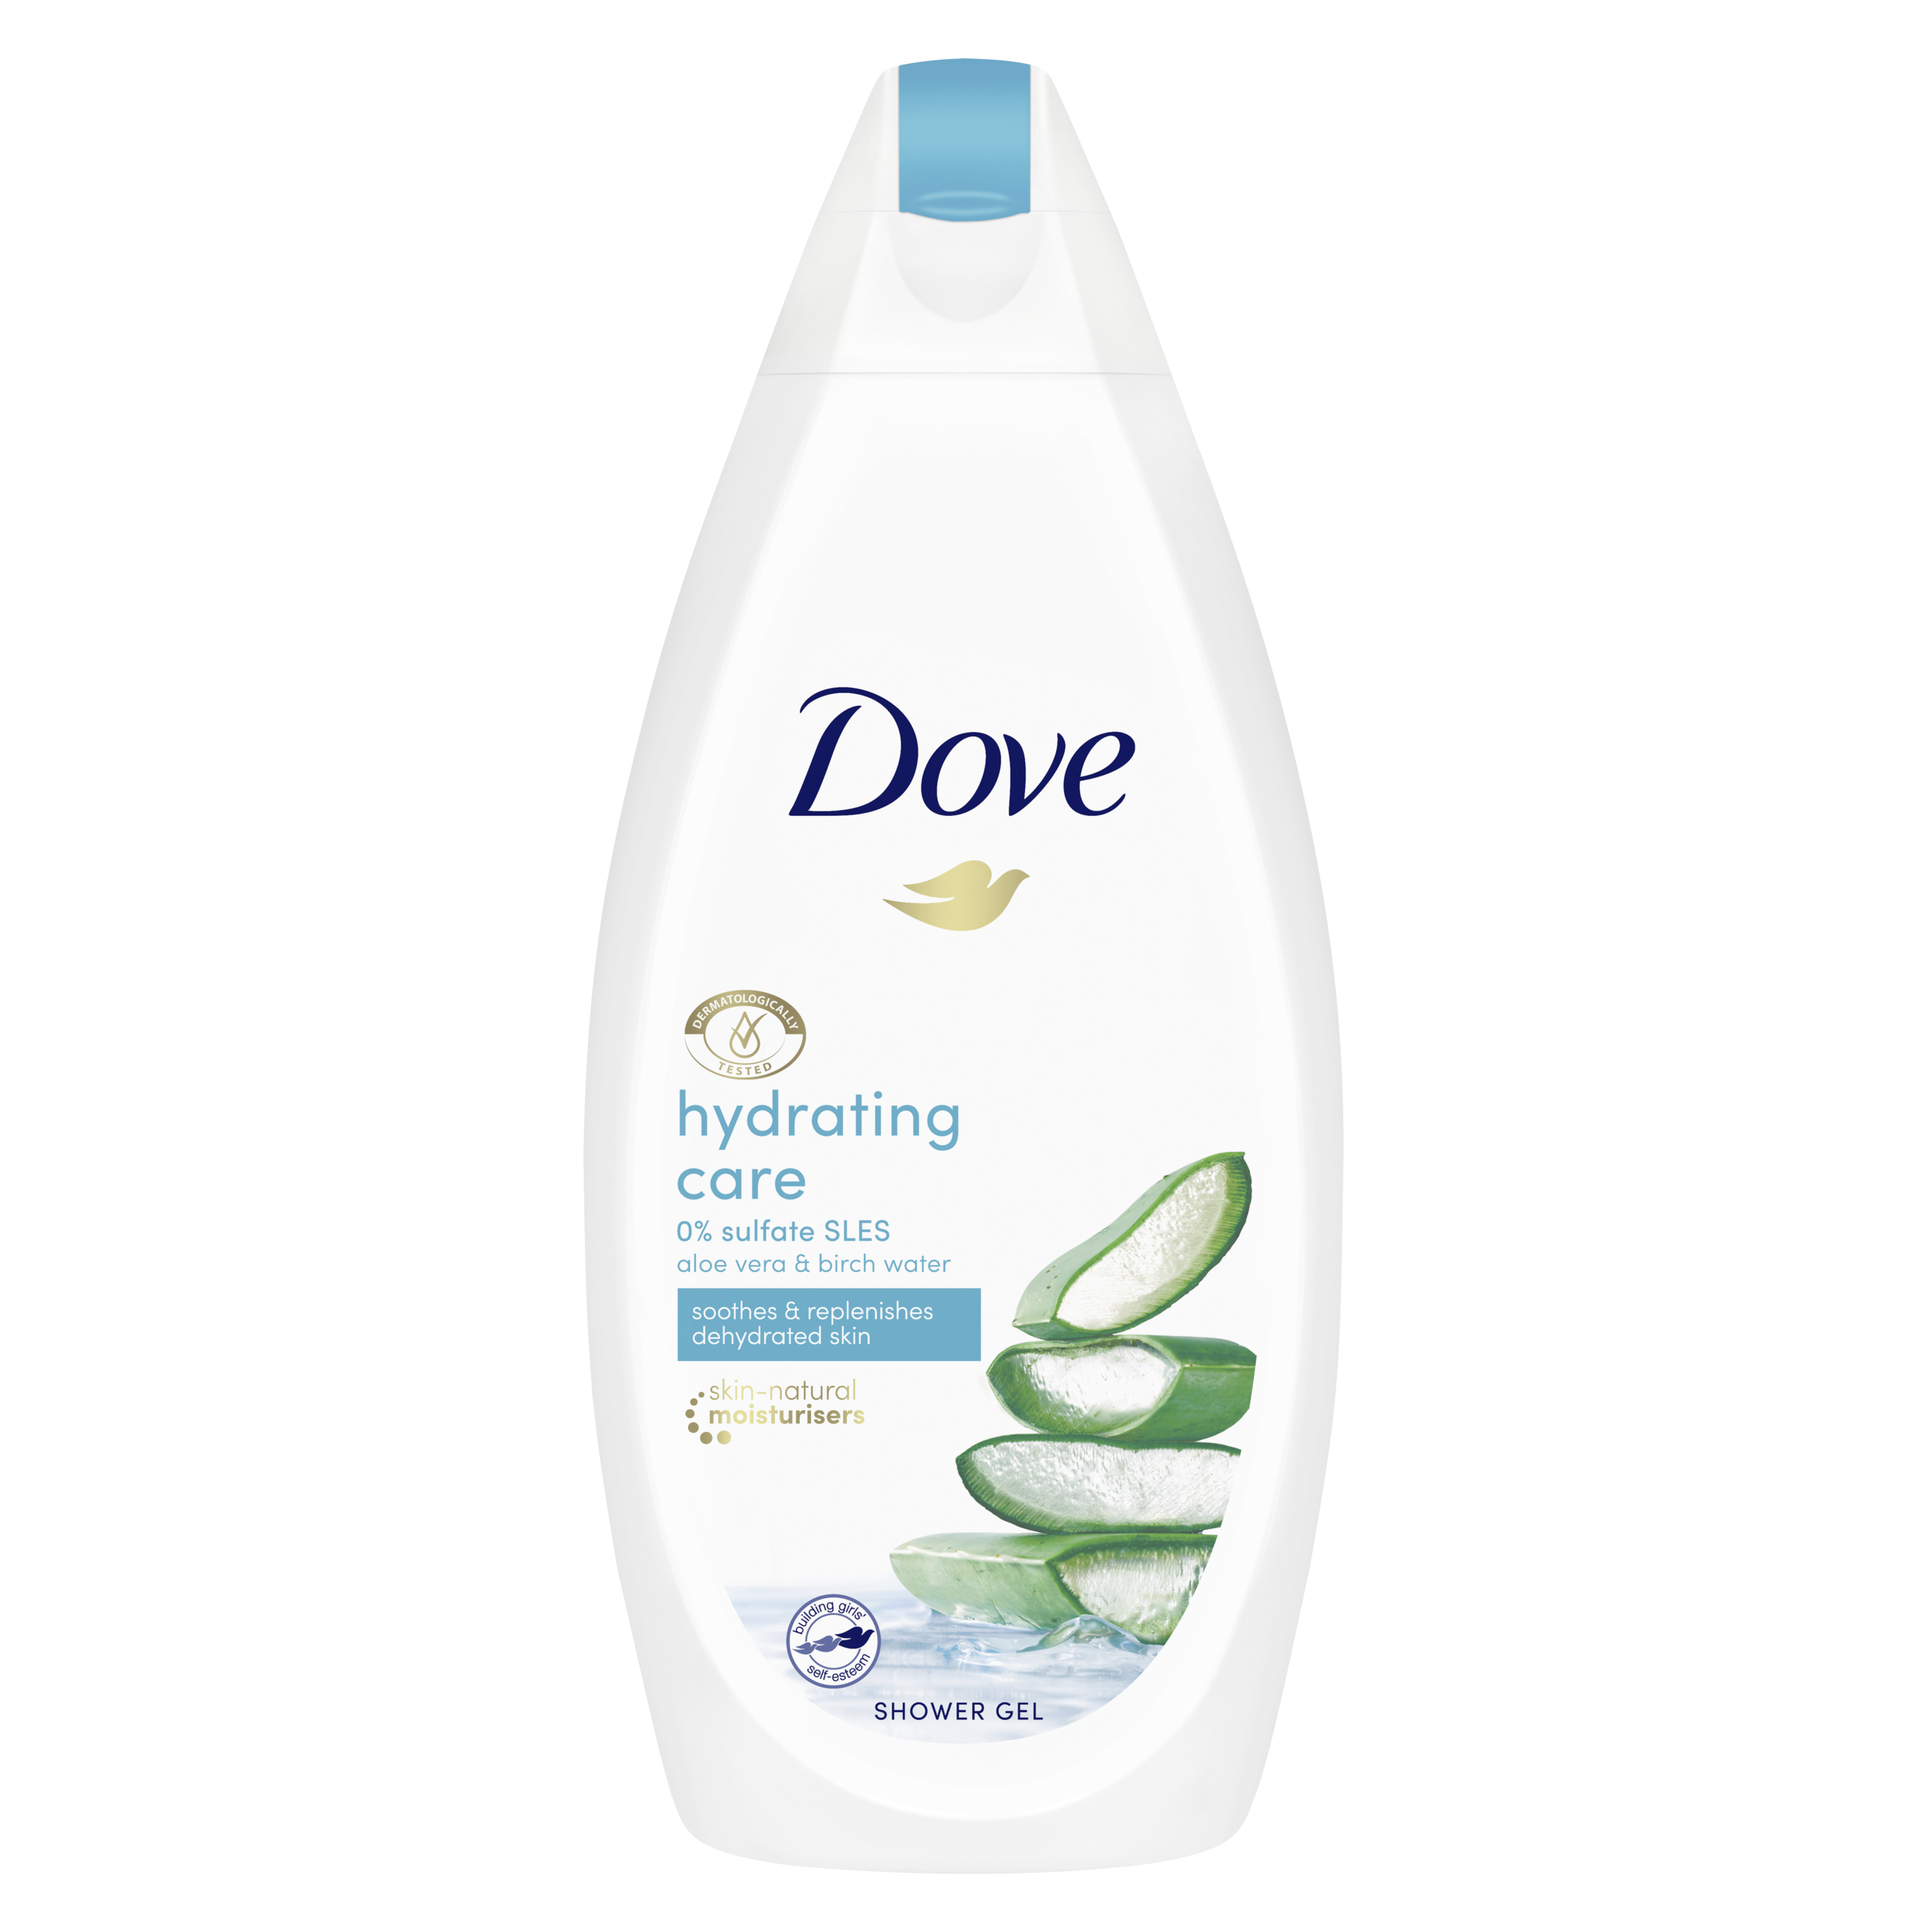 Dove Hydrating Care with Aloe Vera and Birch Water Shower Gel 500ml